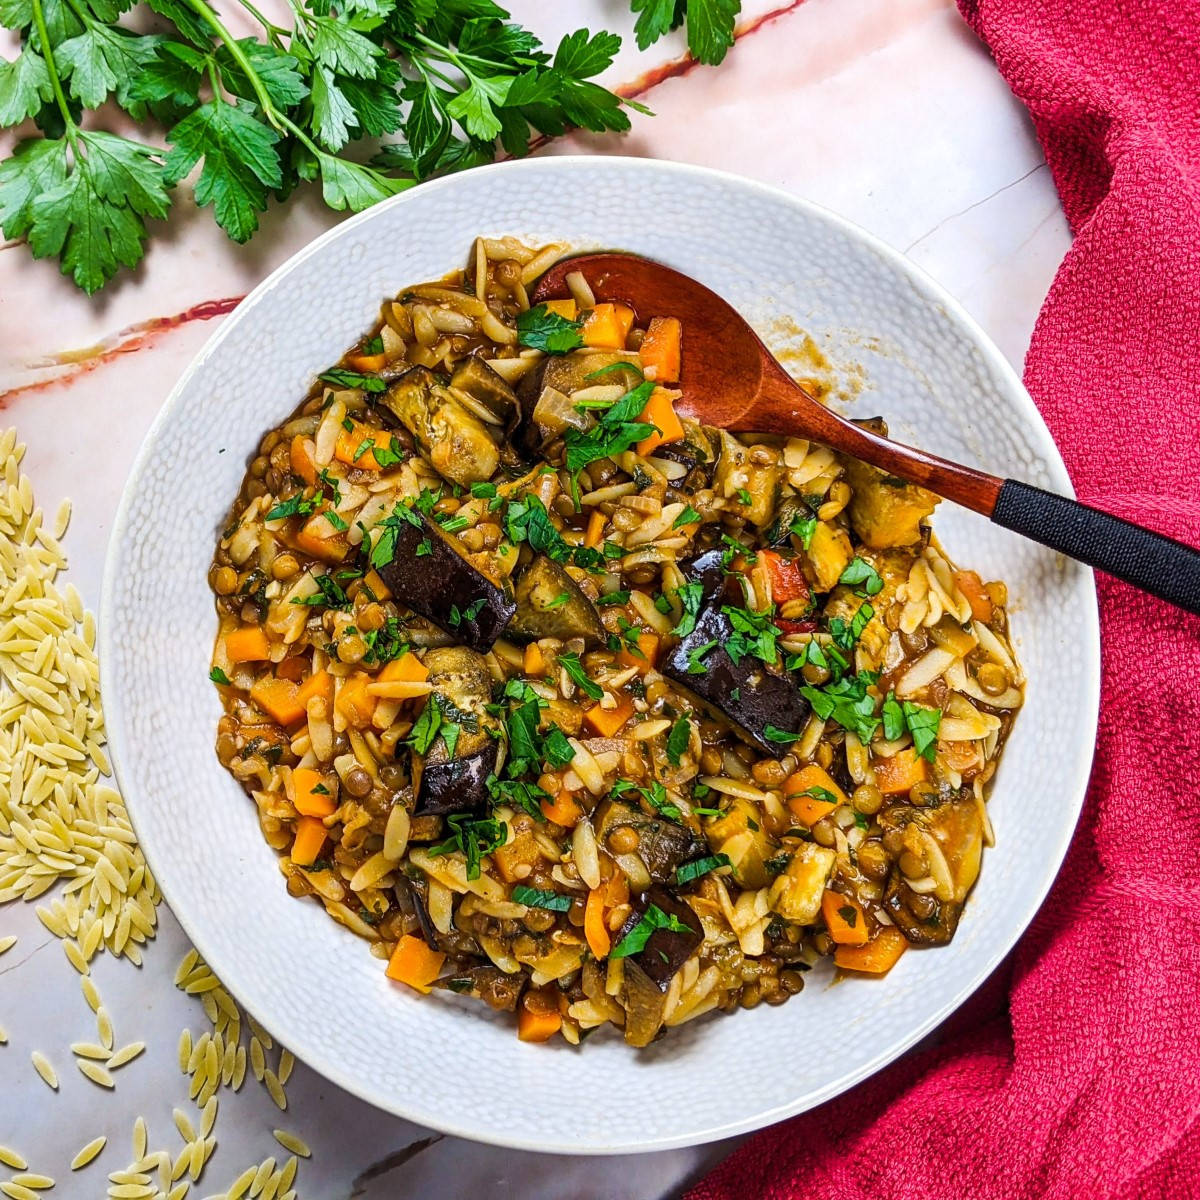 Mediterranean lentil, orzo and roasted eggplant stew served on white dish next to a loaf of bread.